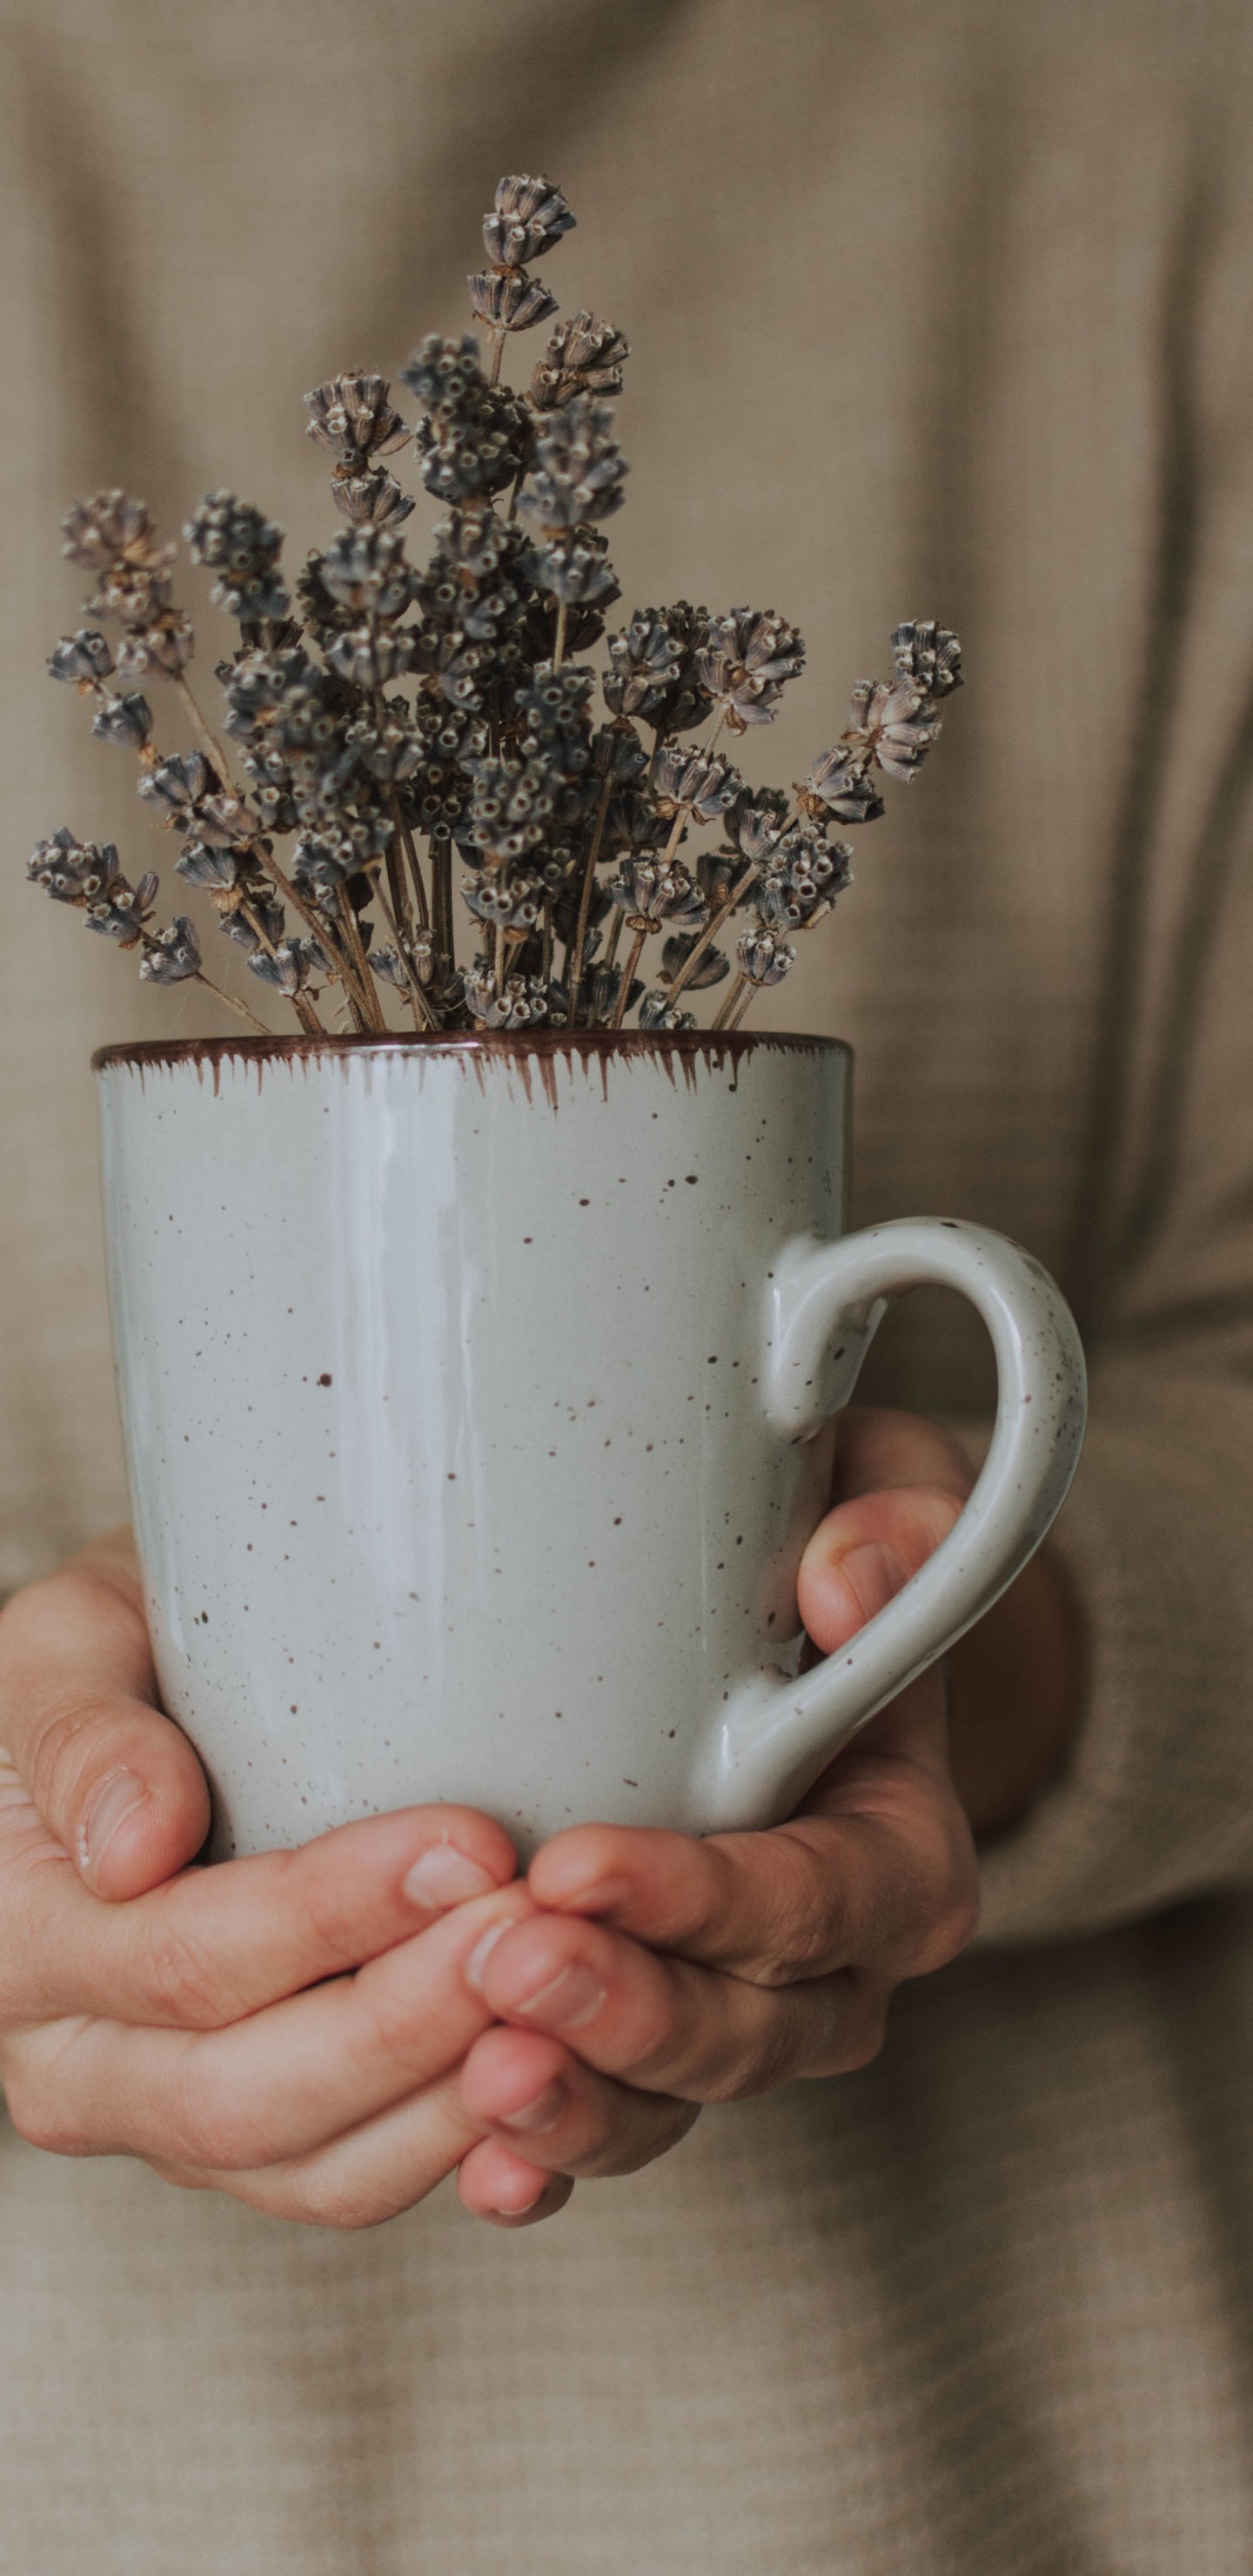 Person Holding White Ceramic Mug With Brown and White Flowers. Wallpaper in 1440x2960 Resolution